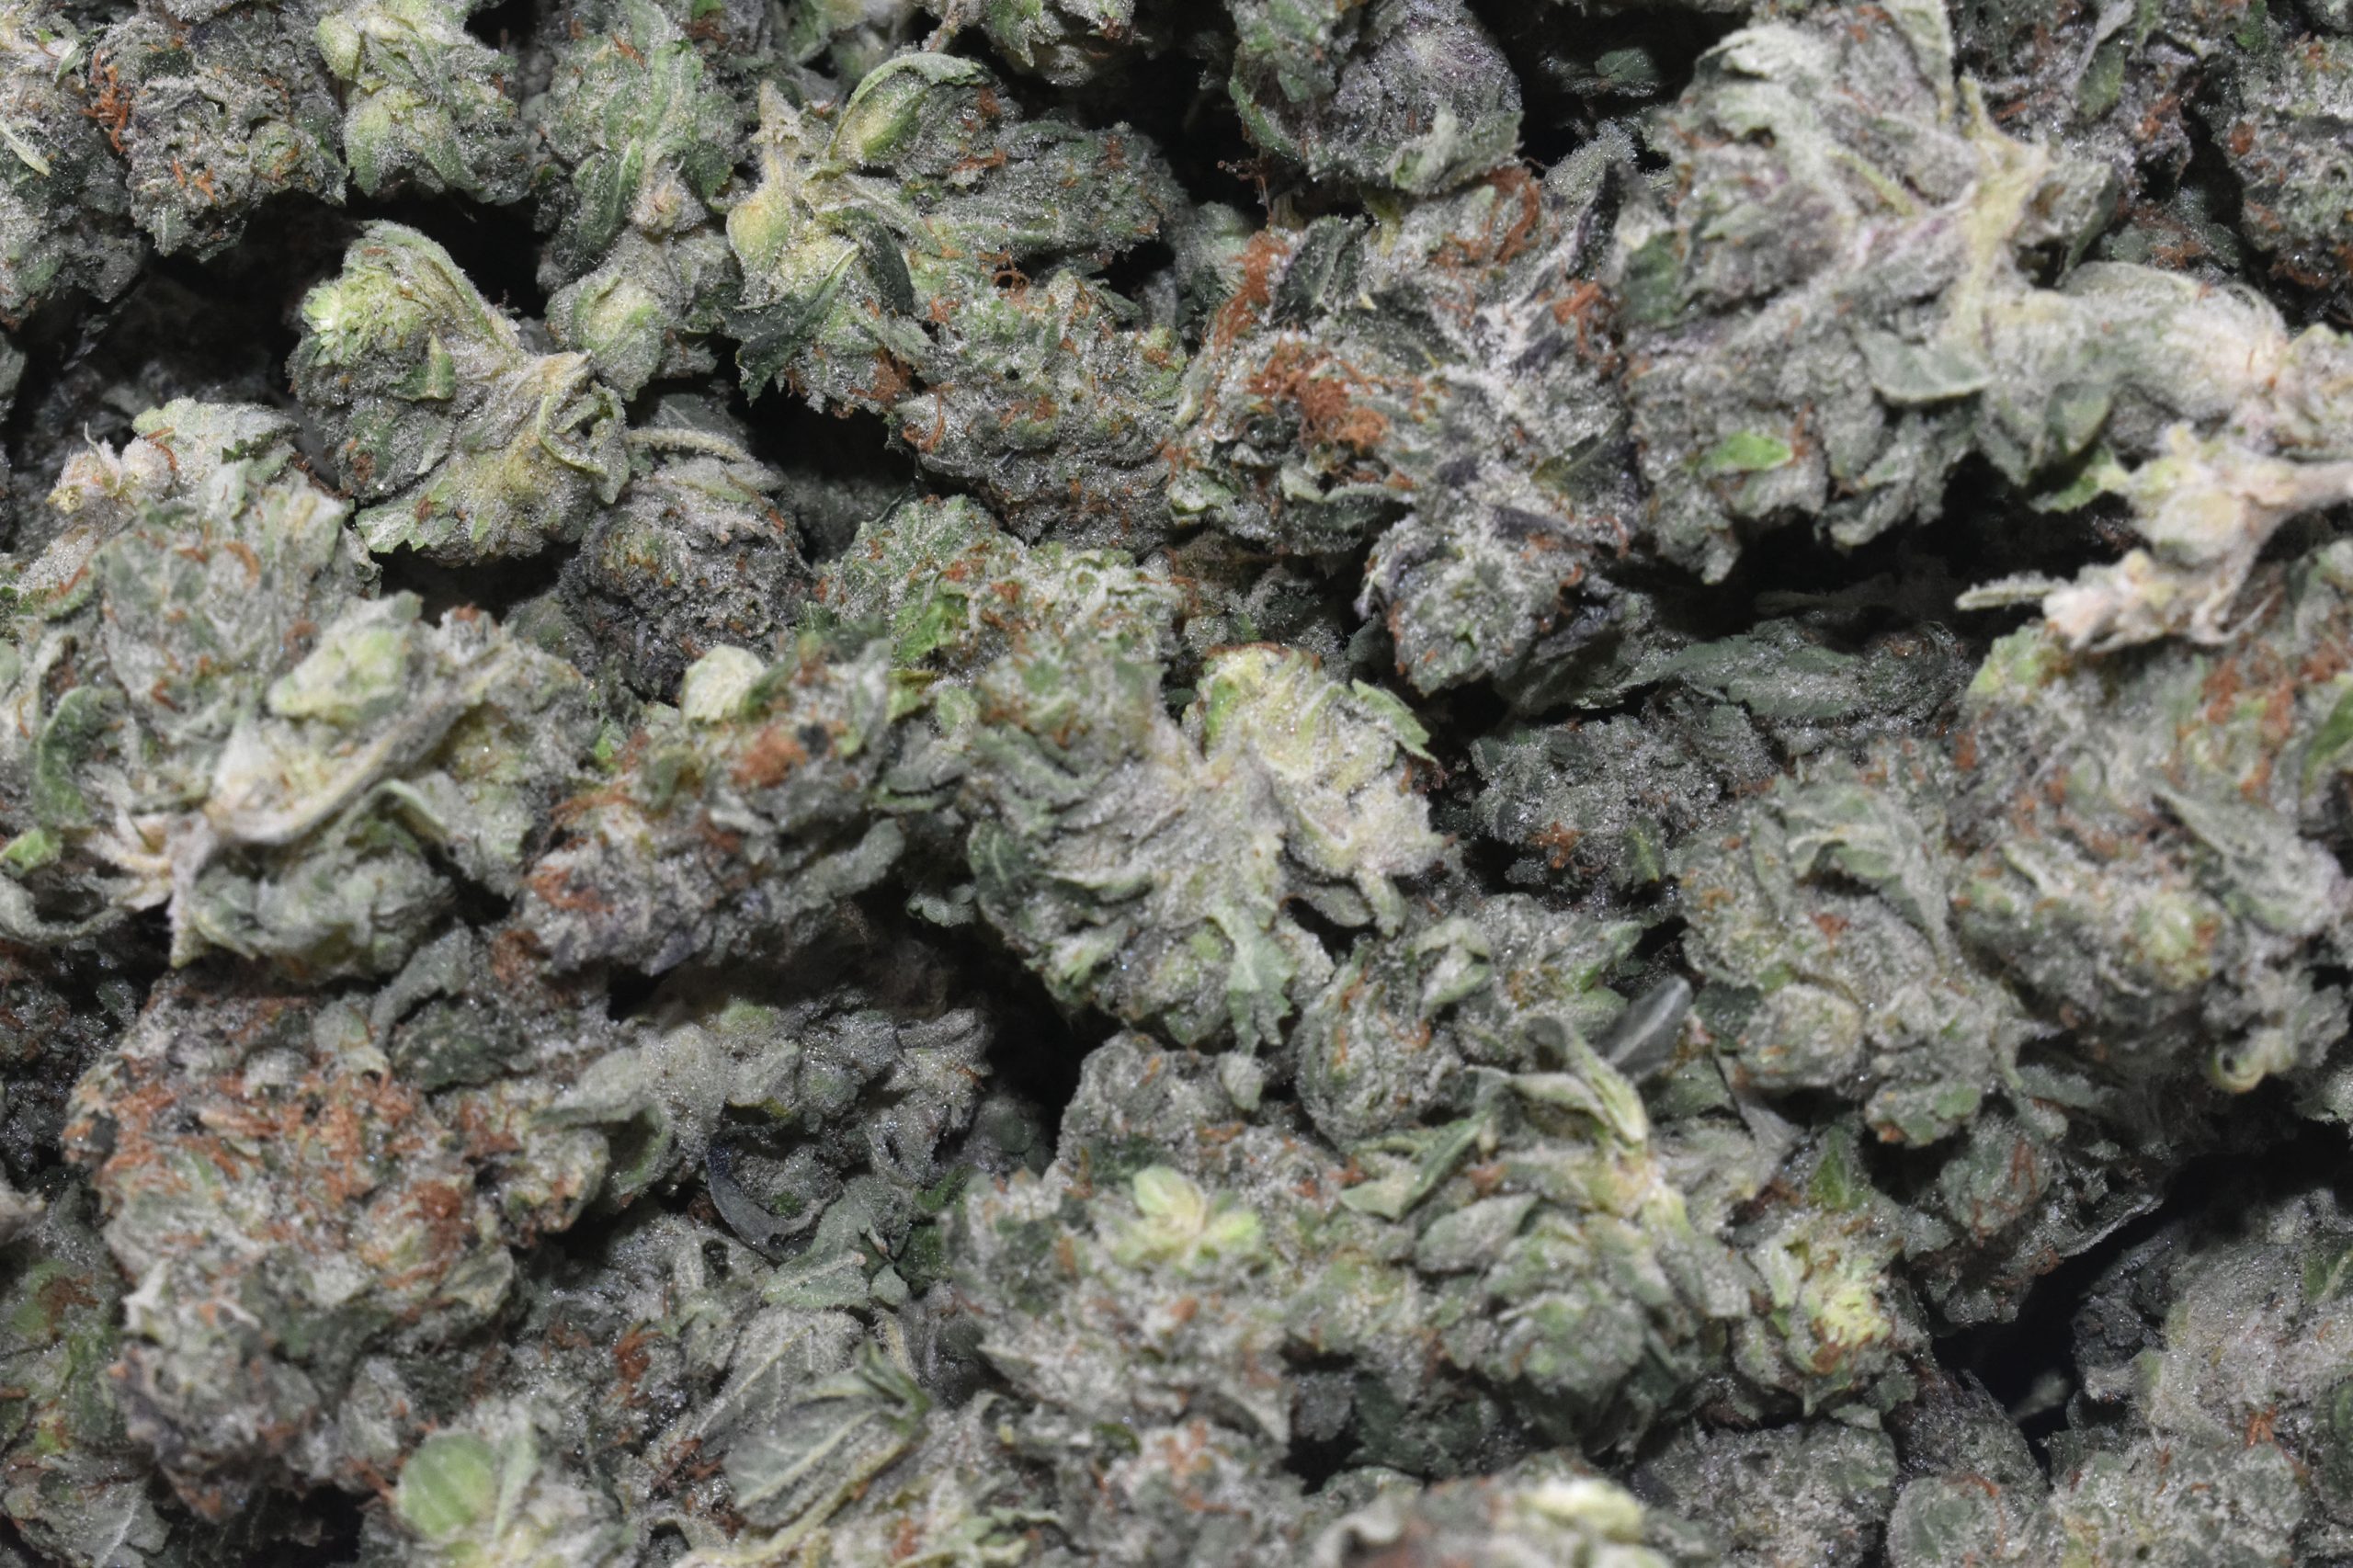 buy-pink-diablo-popcorn-online-at-chronicfarms.cc-online-weed-dispensary